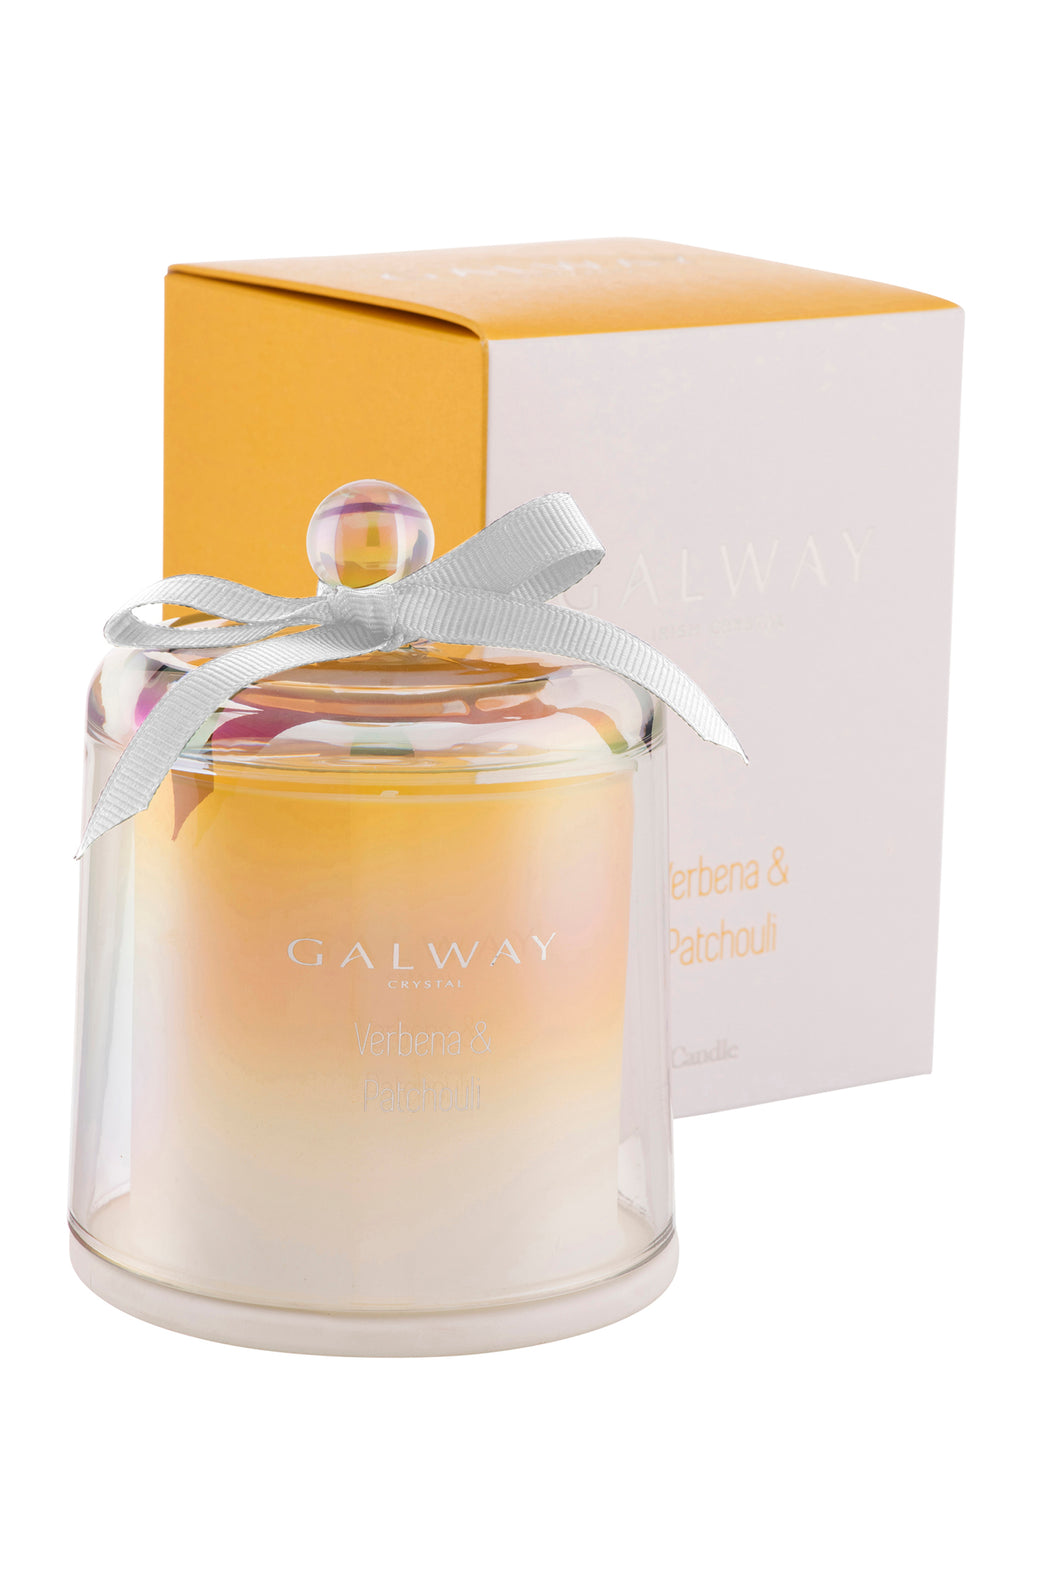 Galway Living Verbena and Patchouli Cloche Candle. Earthy, woody base notes of patchouli & cedarwood bring this blend together to create a fresh yet complex fragrance. Burn Time - 30 Hours Approx Measures - 12cm x 9cm 